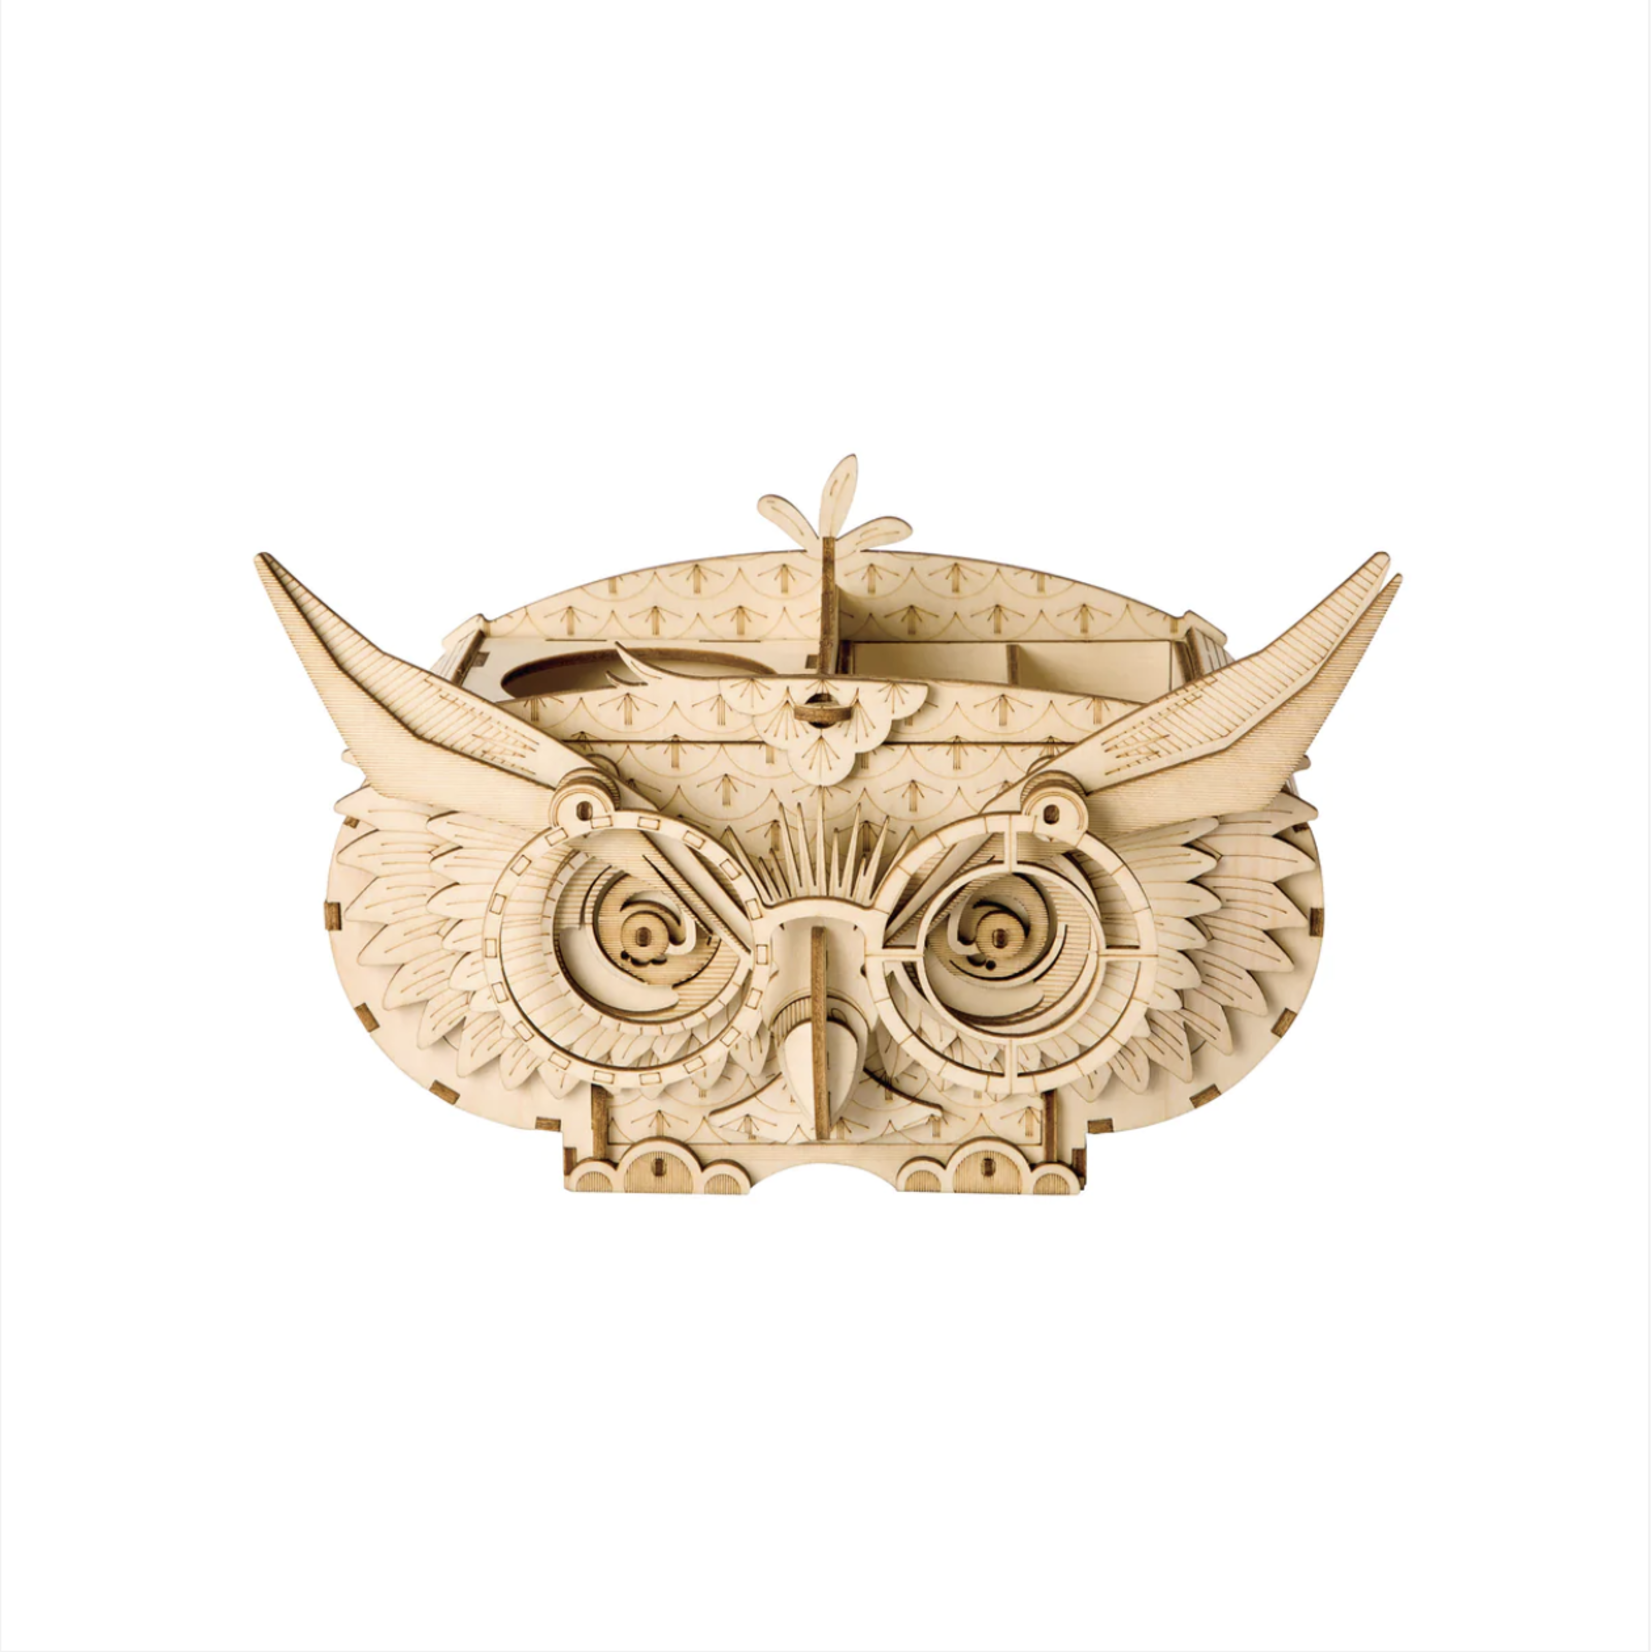 HANDS CRAFT CLASSICAL 3D WOODEN PUZZLE OWL STORAGE BOX